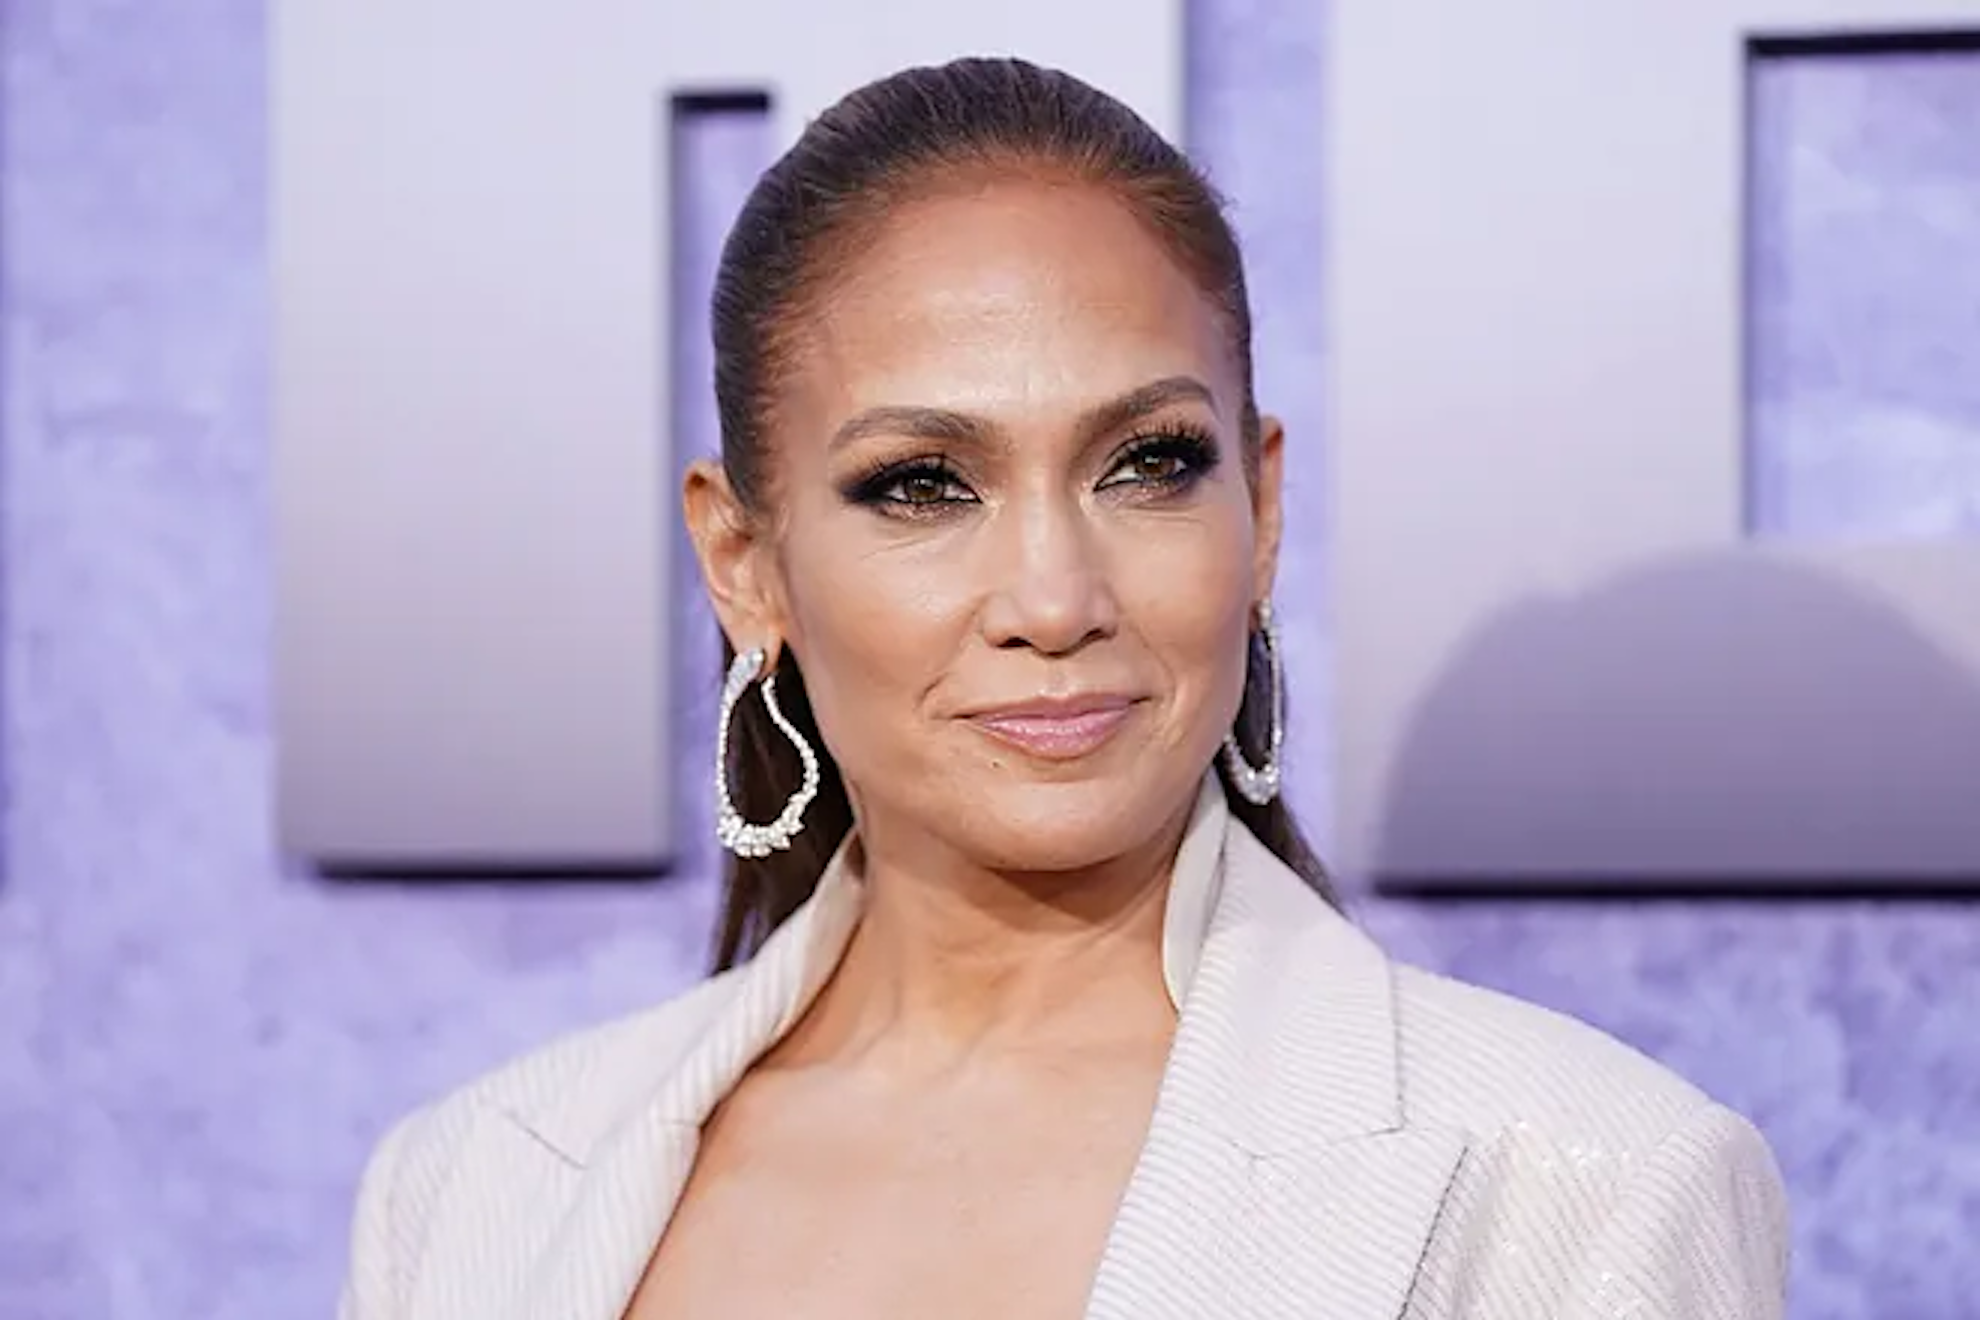 Jennifer Lopez is branded rude after spitting used chewing gum into her assistants hand